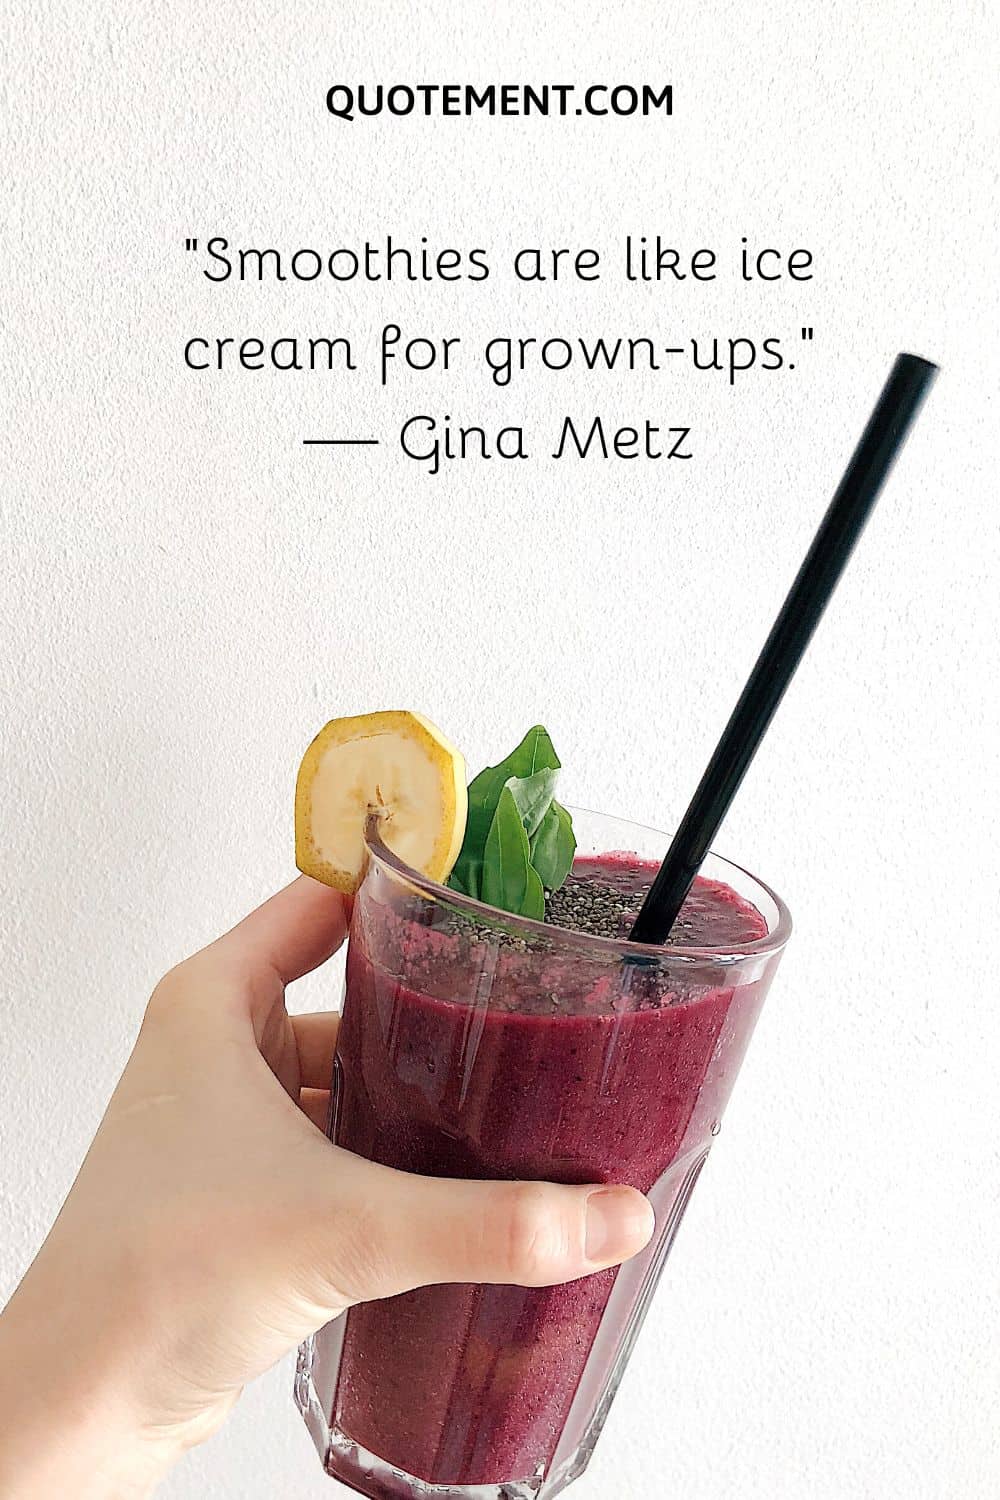 “Smoothies are like ice cream for grown-ups.” — Gina Metz